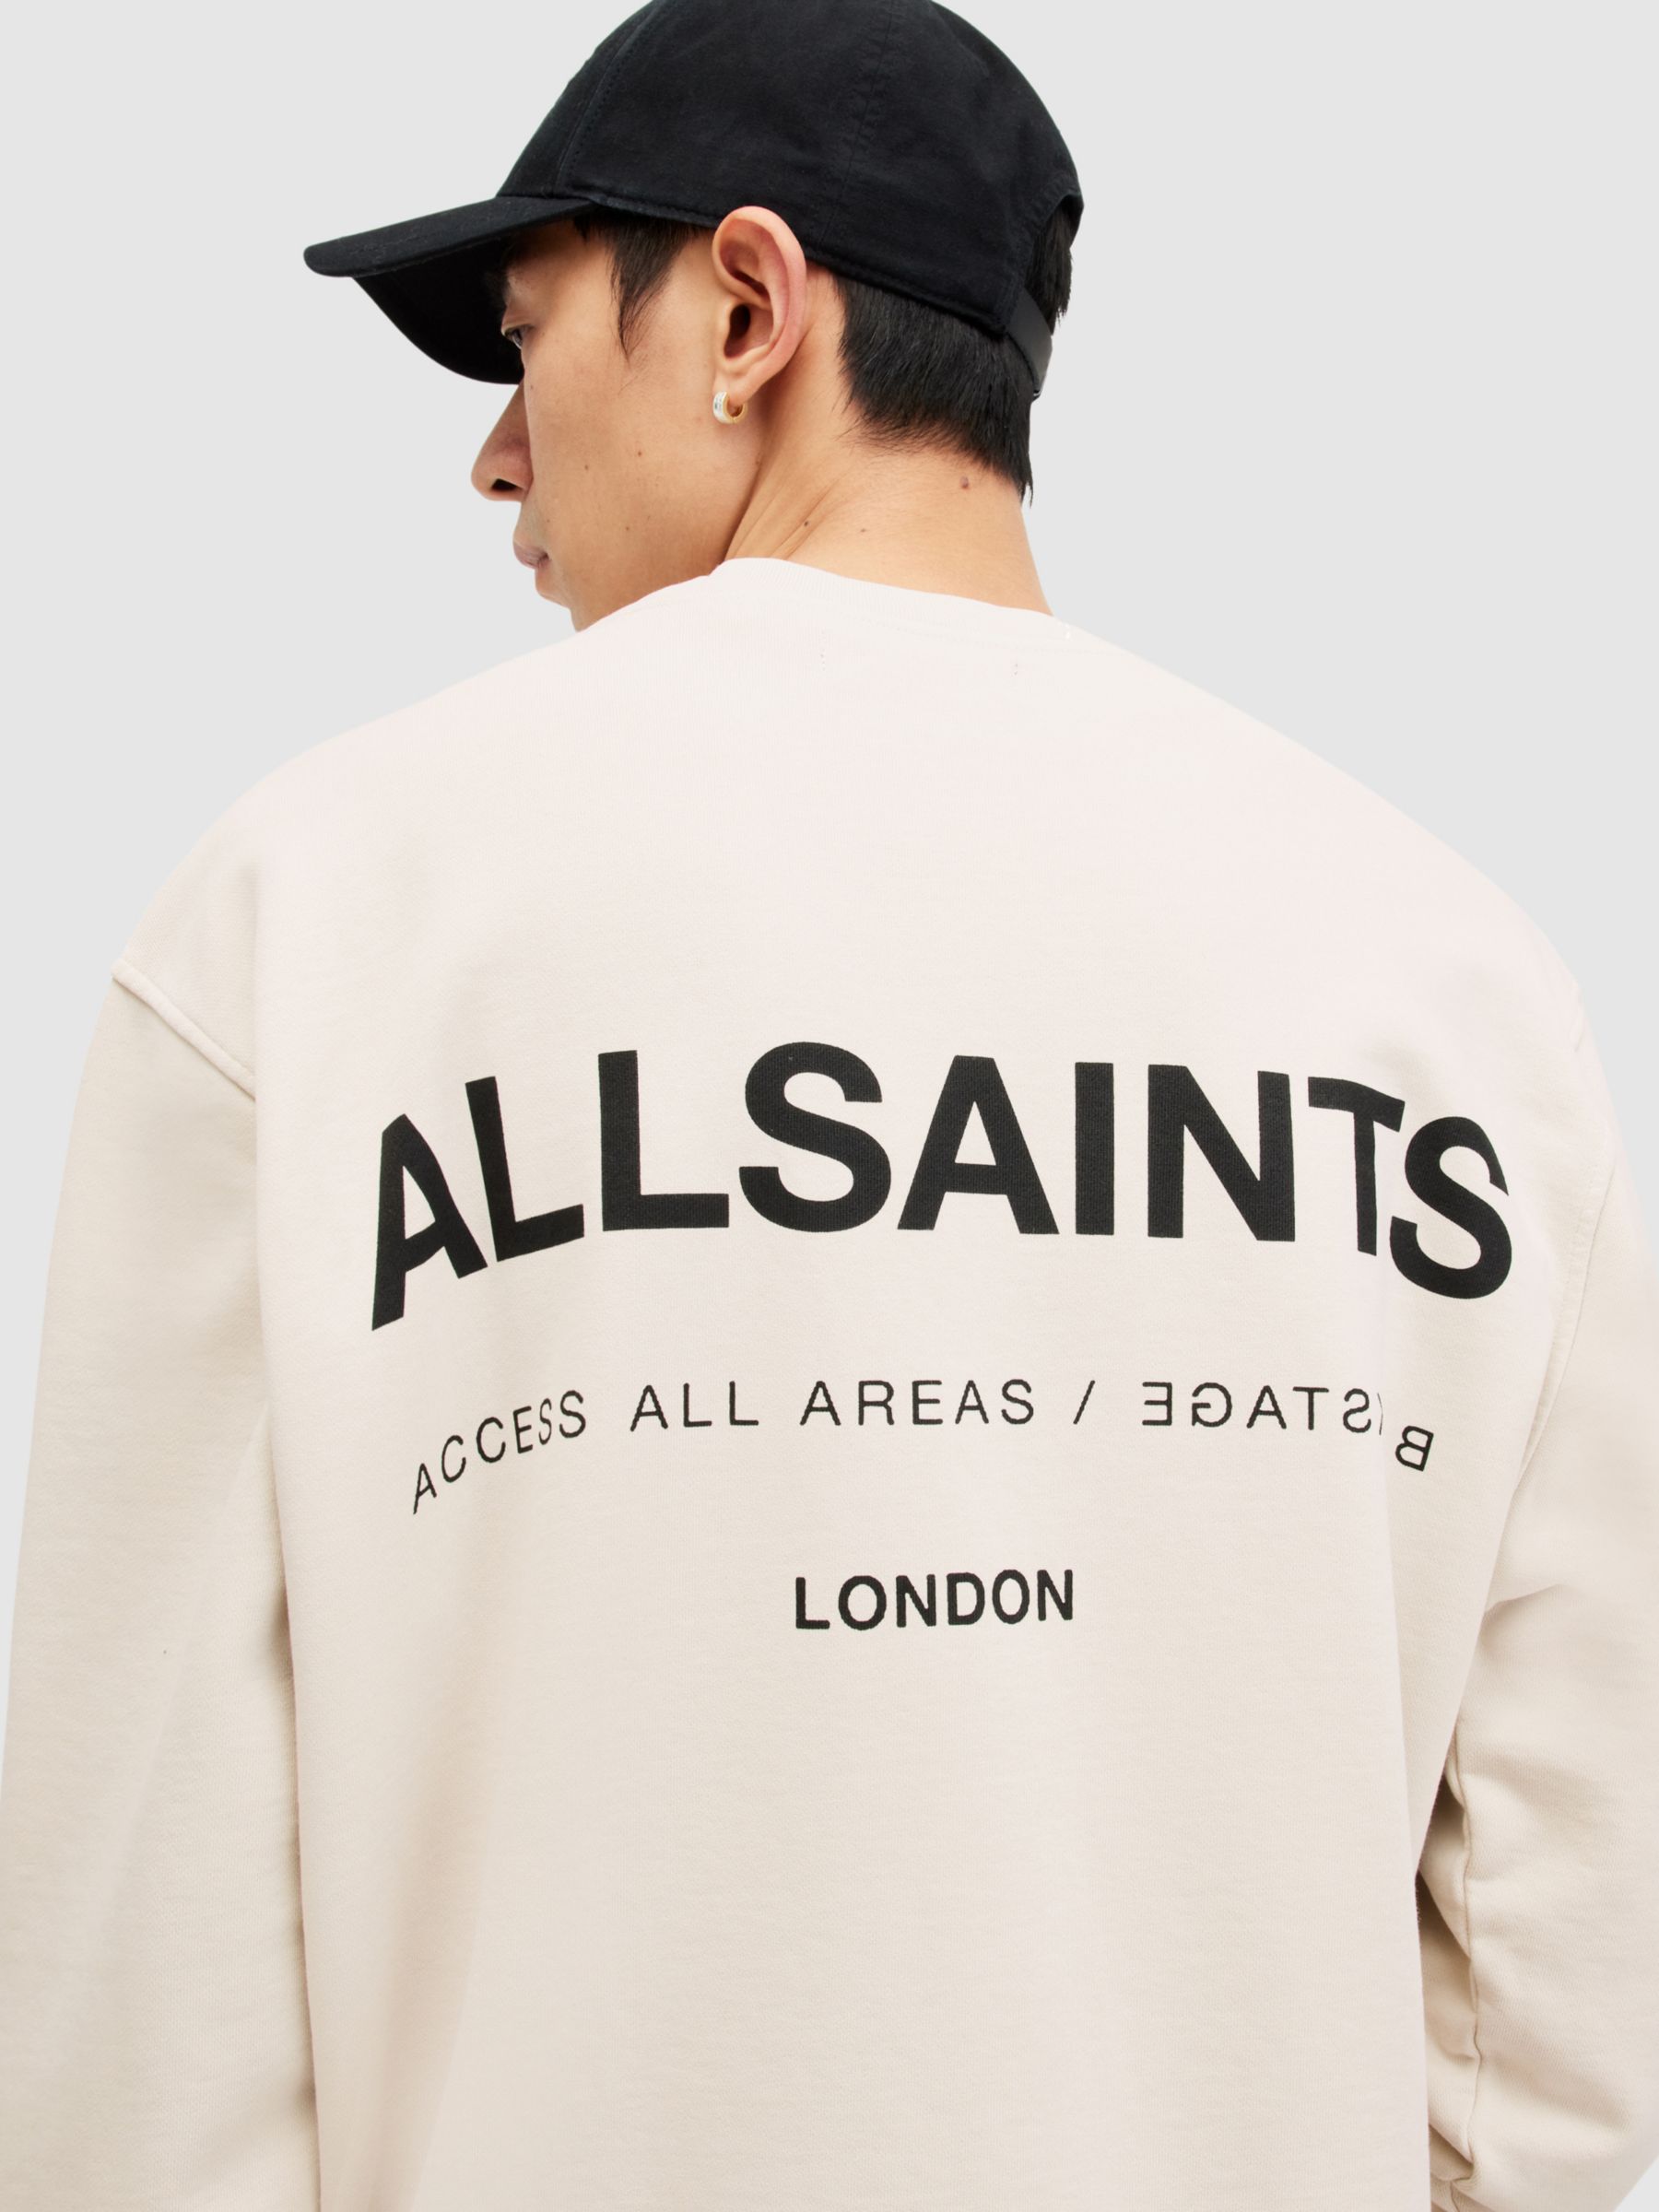 AllSaints Access Crew Jumper, Bailey Taupe, XS